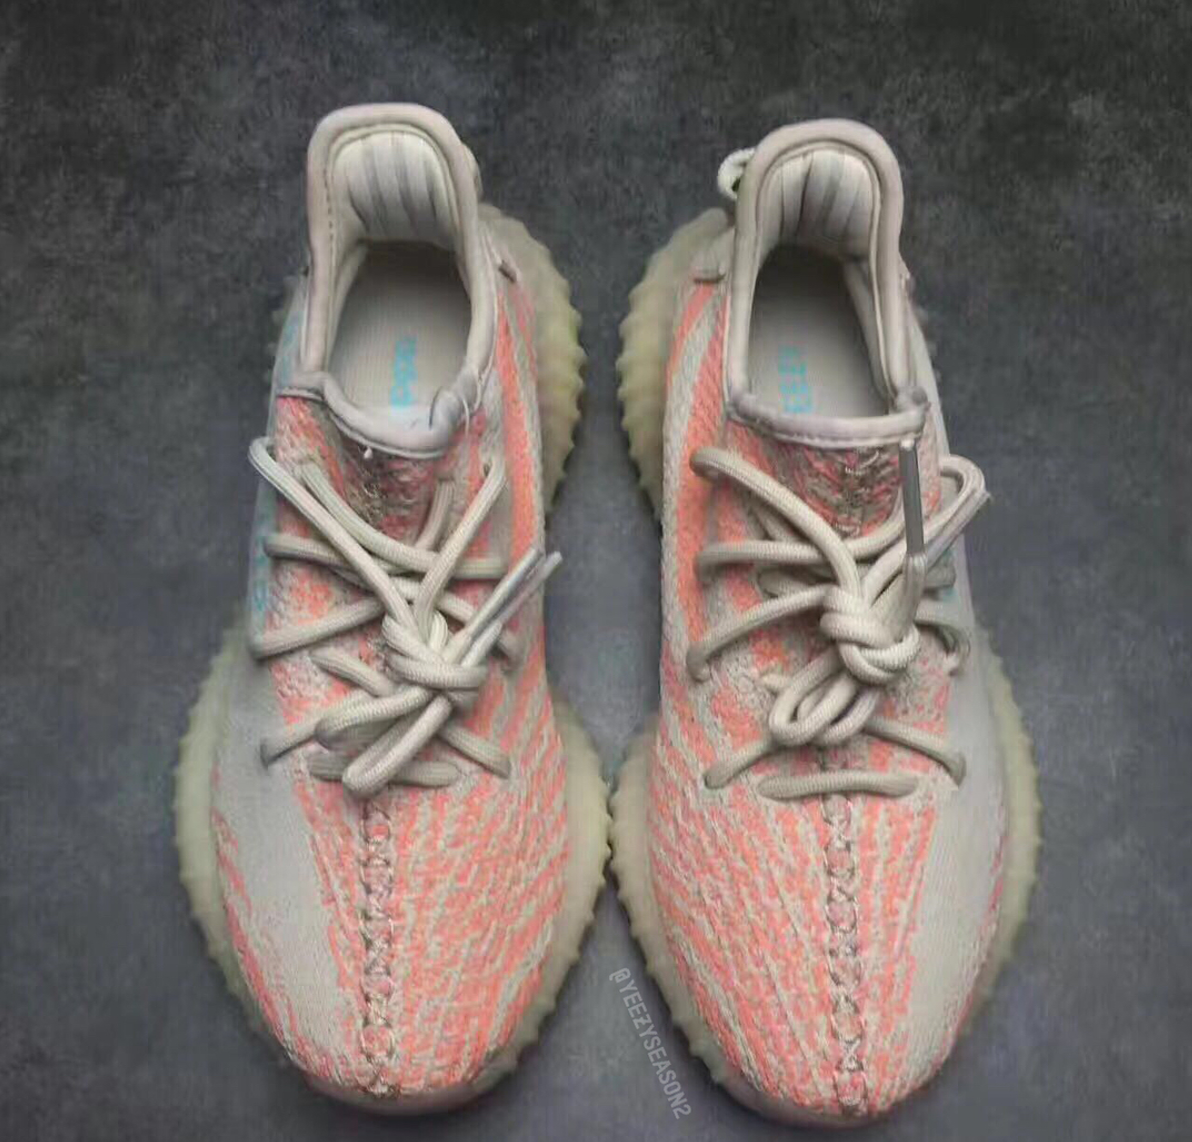 Images Of A Potential adidas Originals YEEZY Boost 350 V2 ‘Chalk Coral’ Colourway Have Surfaced